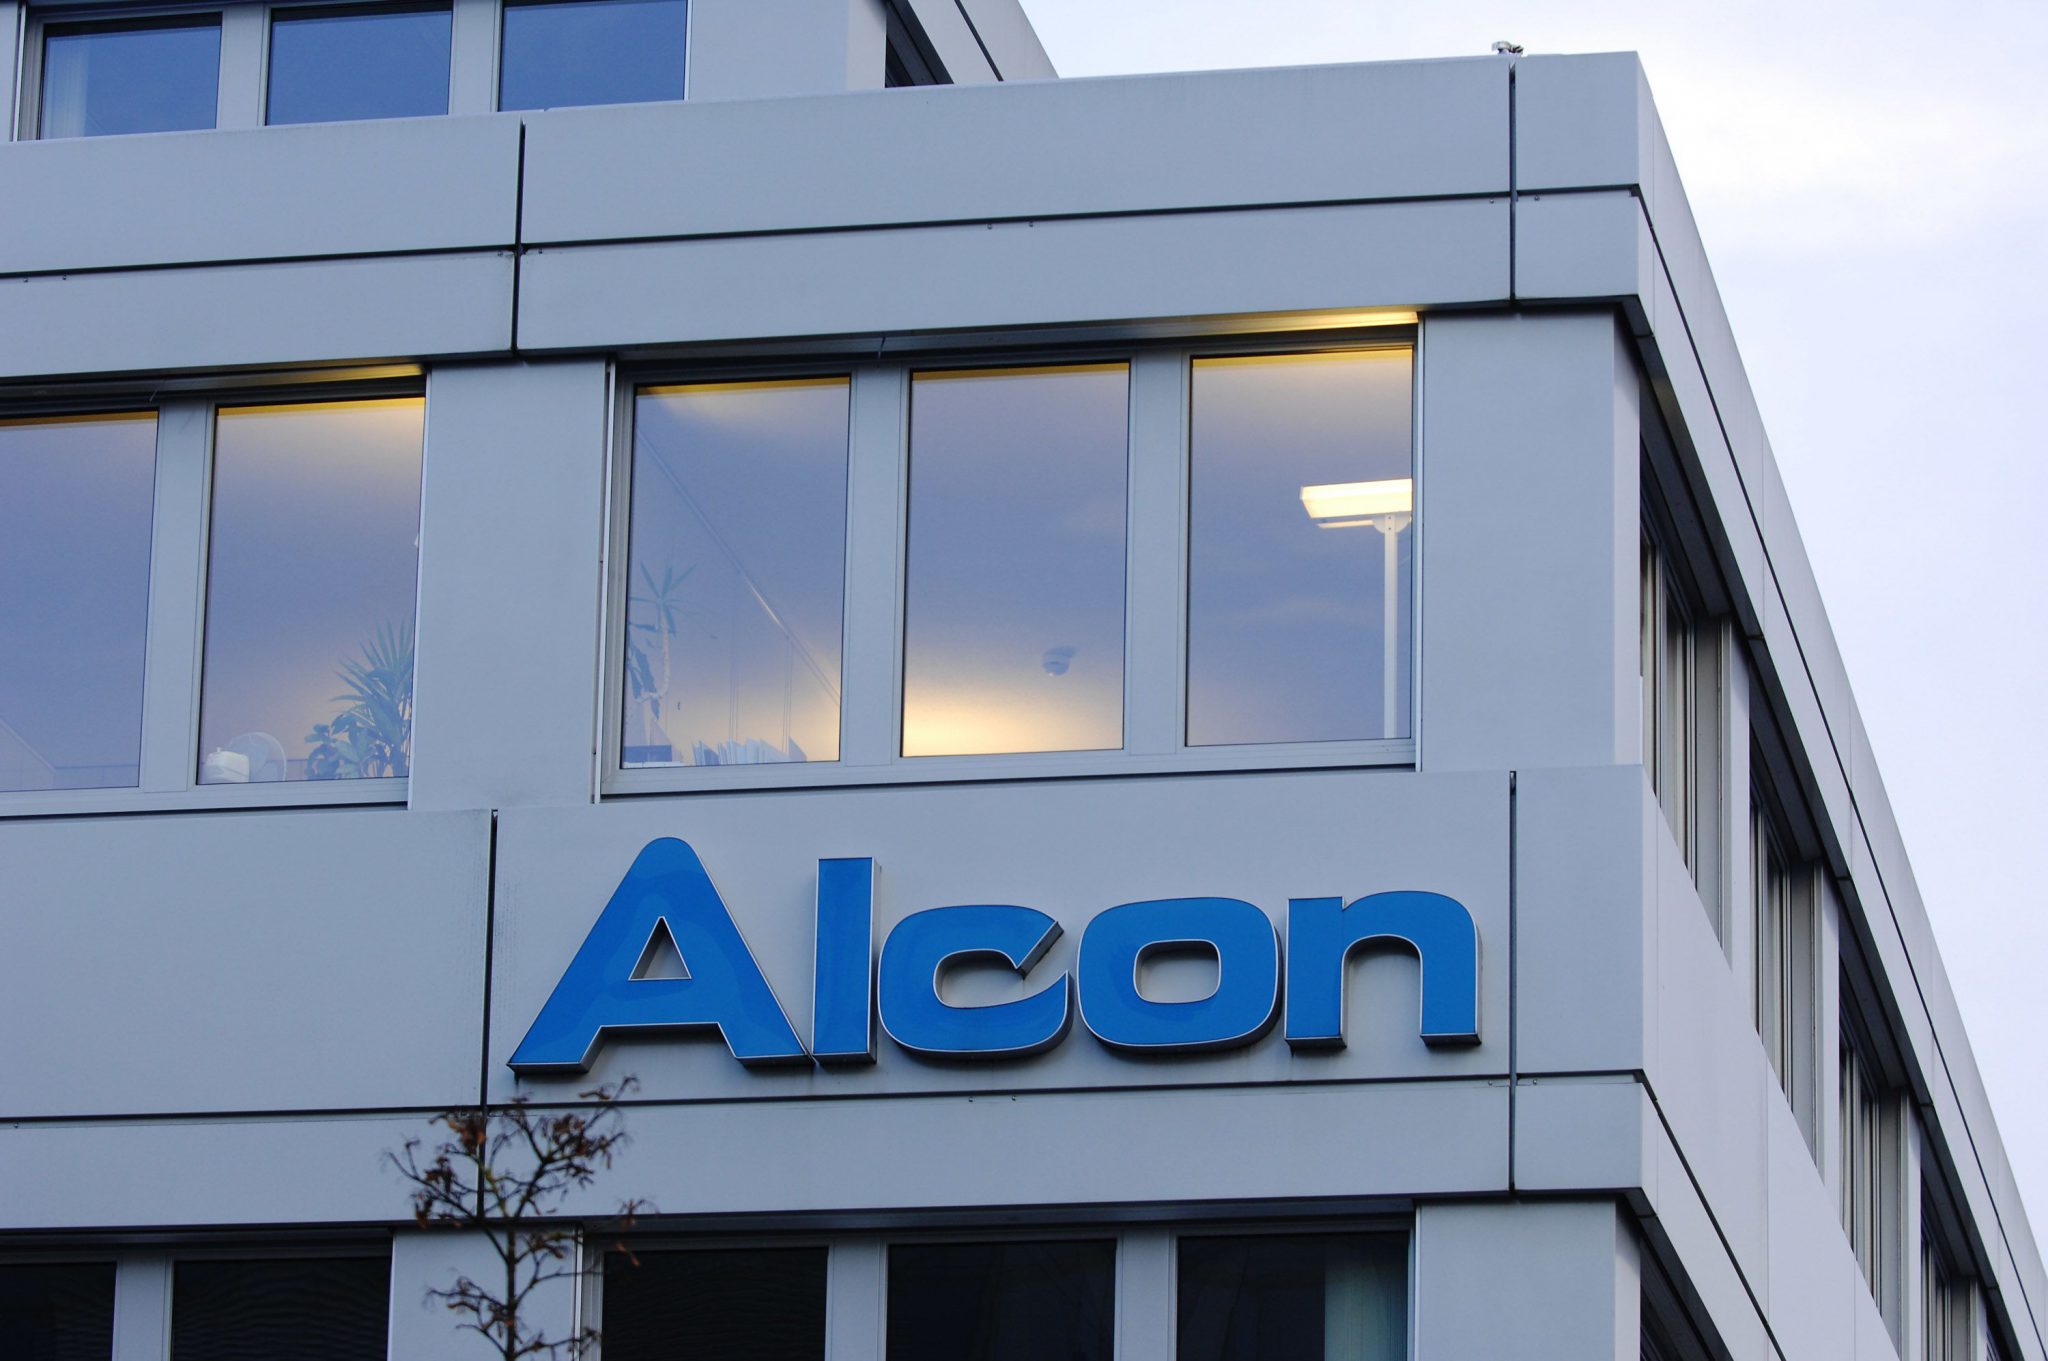 Alcon (Novartis Division) Plans to Develop SMART Suite Equipment for Improved Cataract Surgery